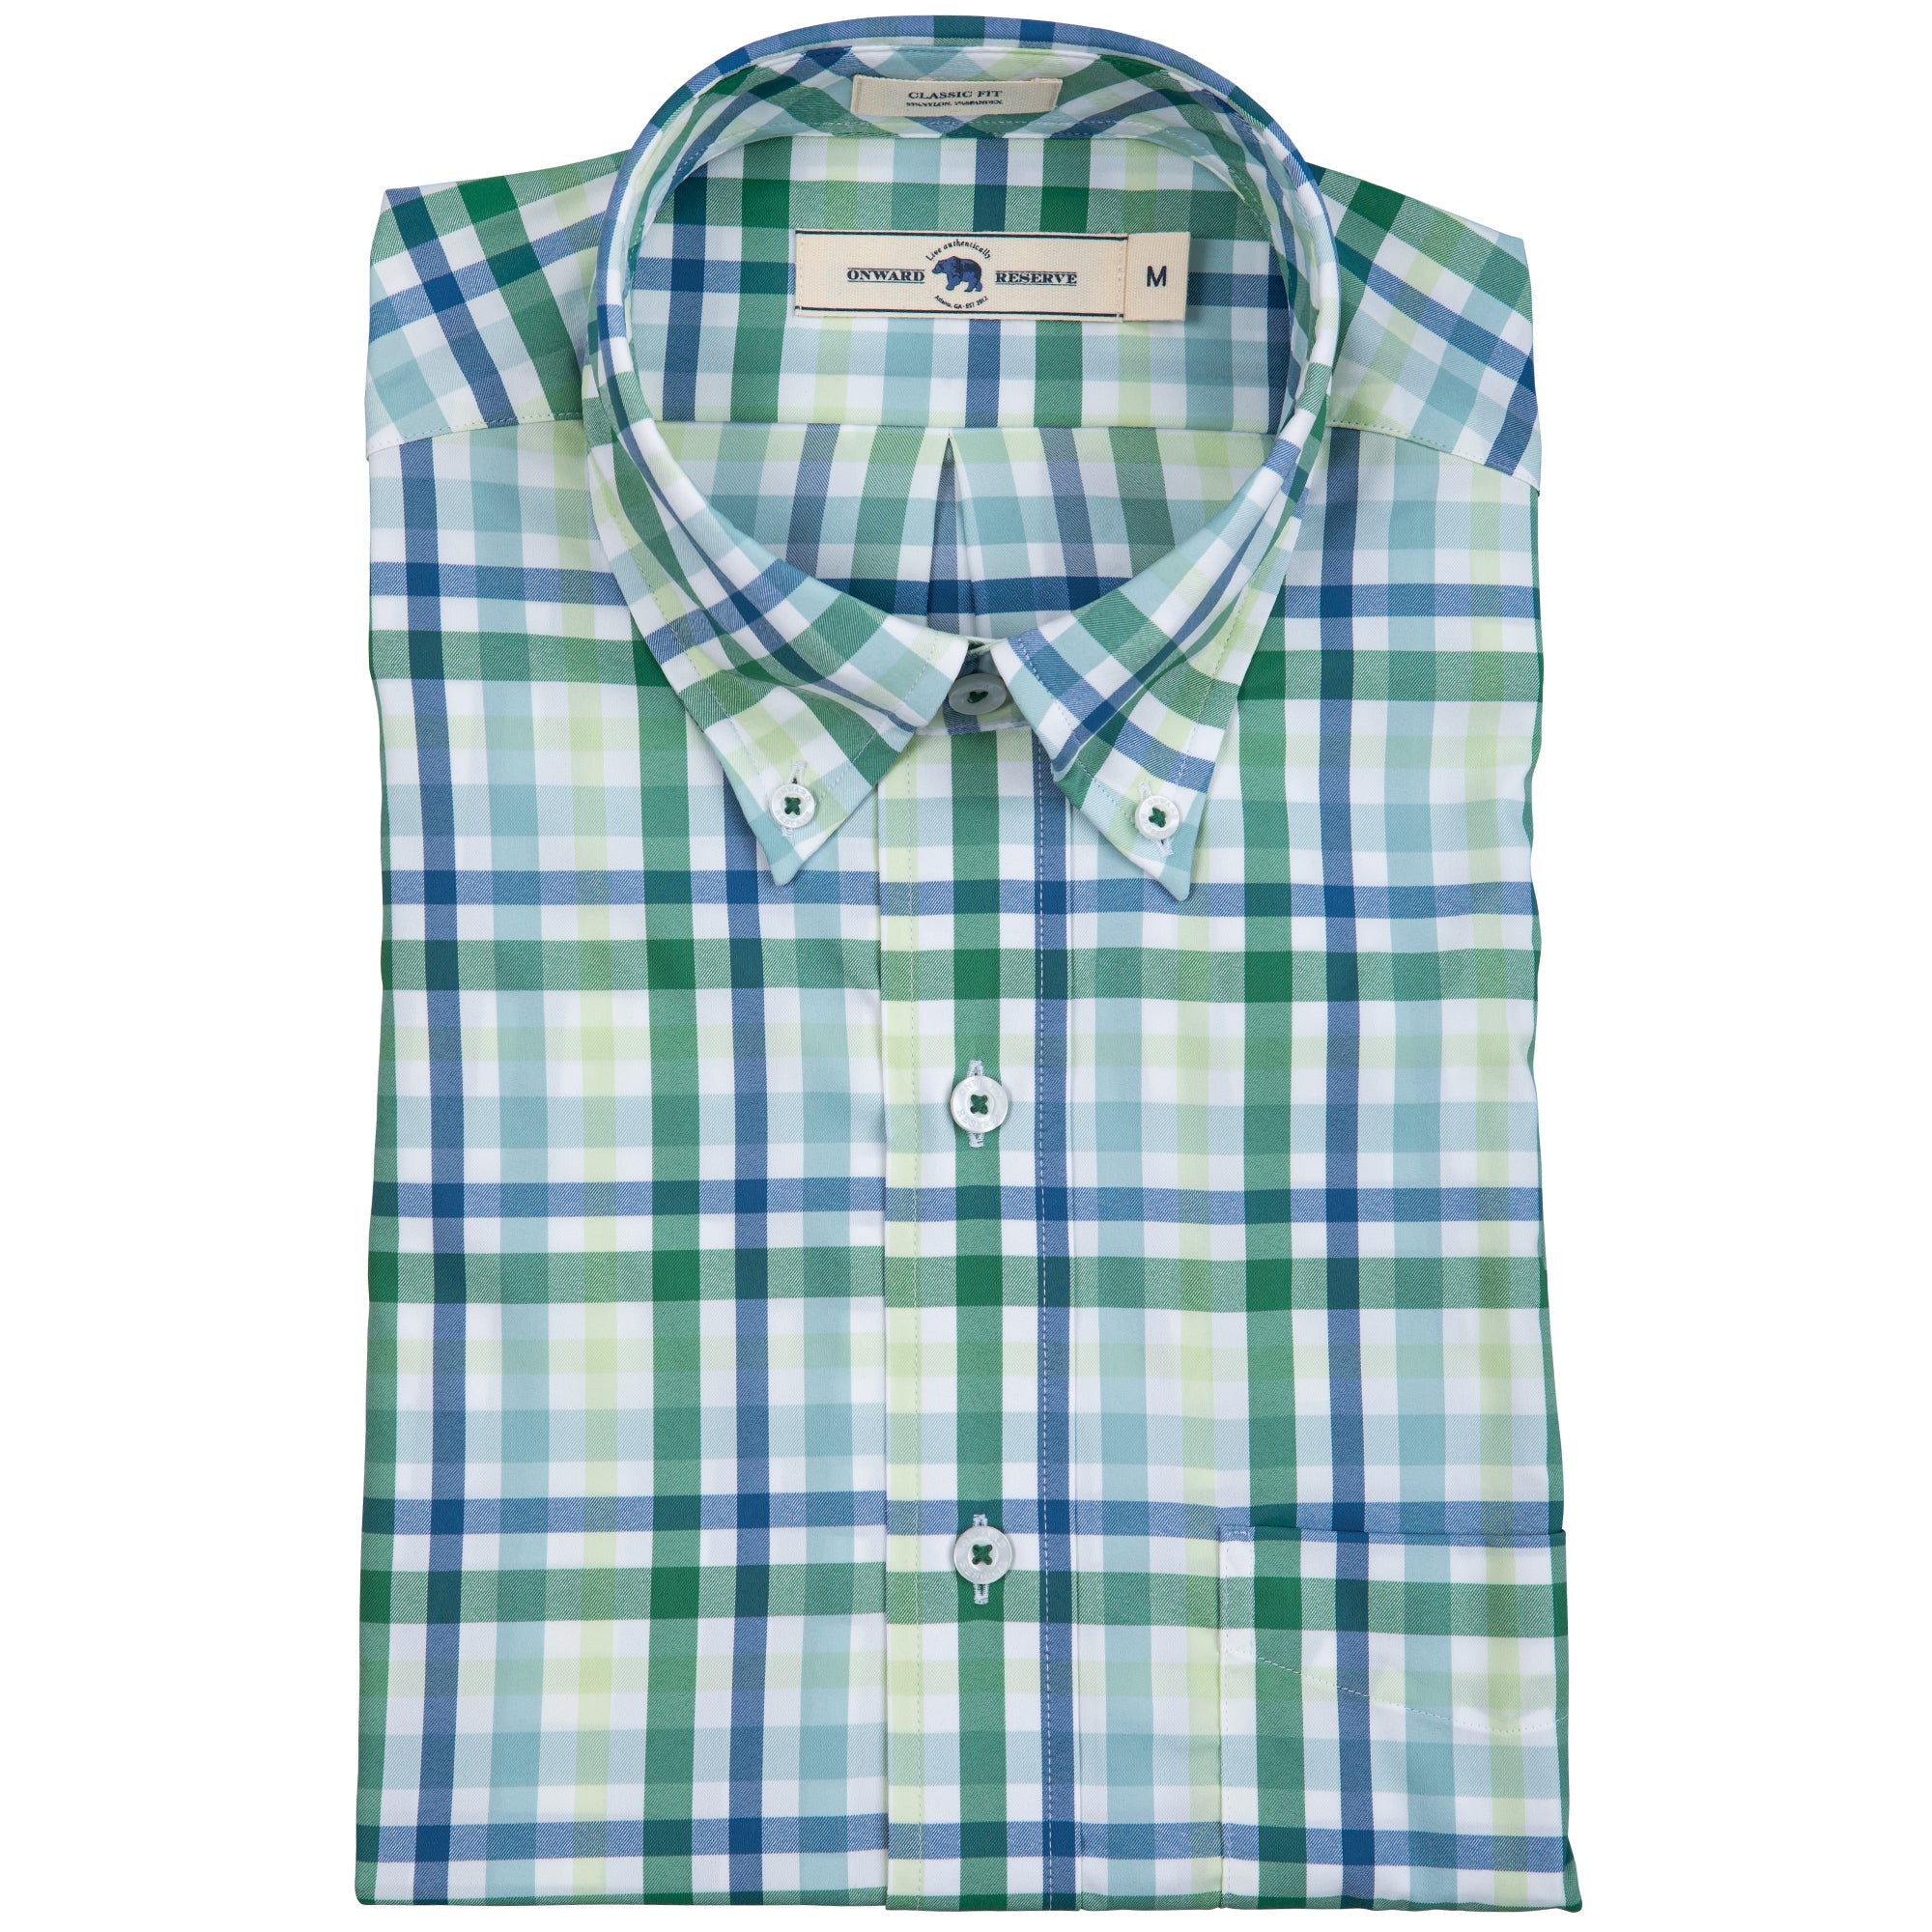 Onward Reserve - M's Classic Fit Performance Button Down Shirt Meade